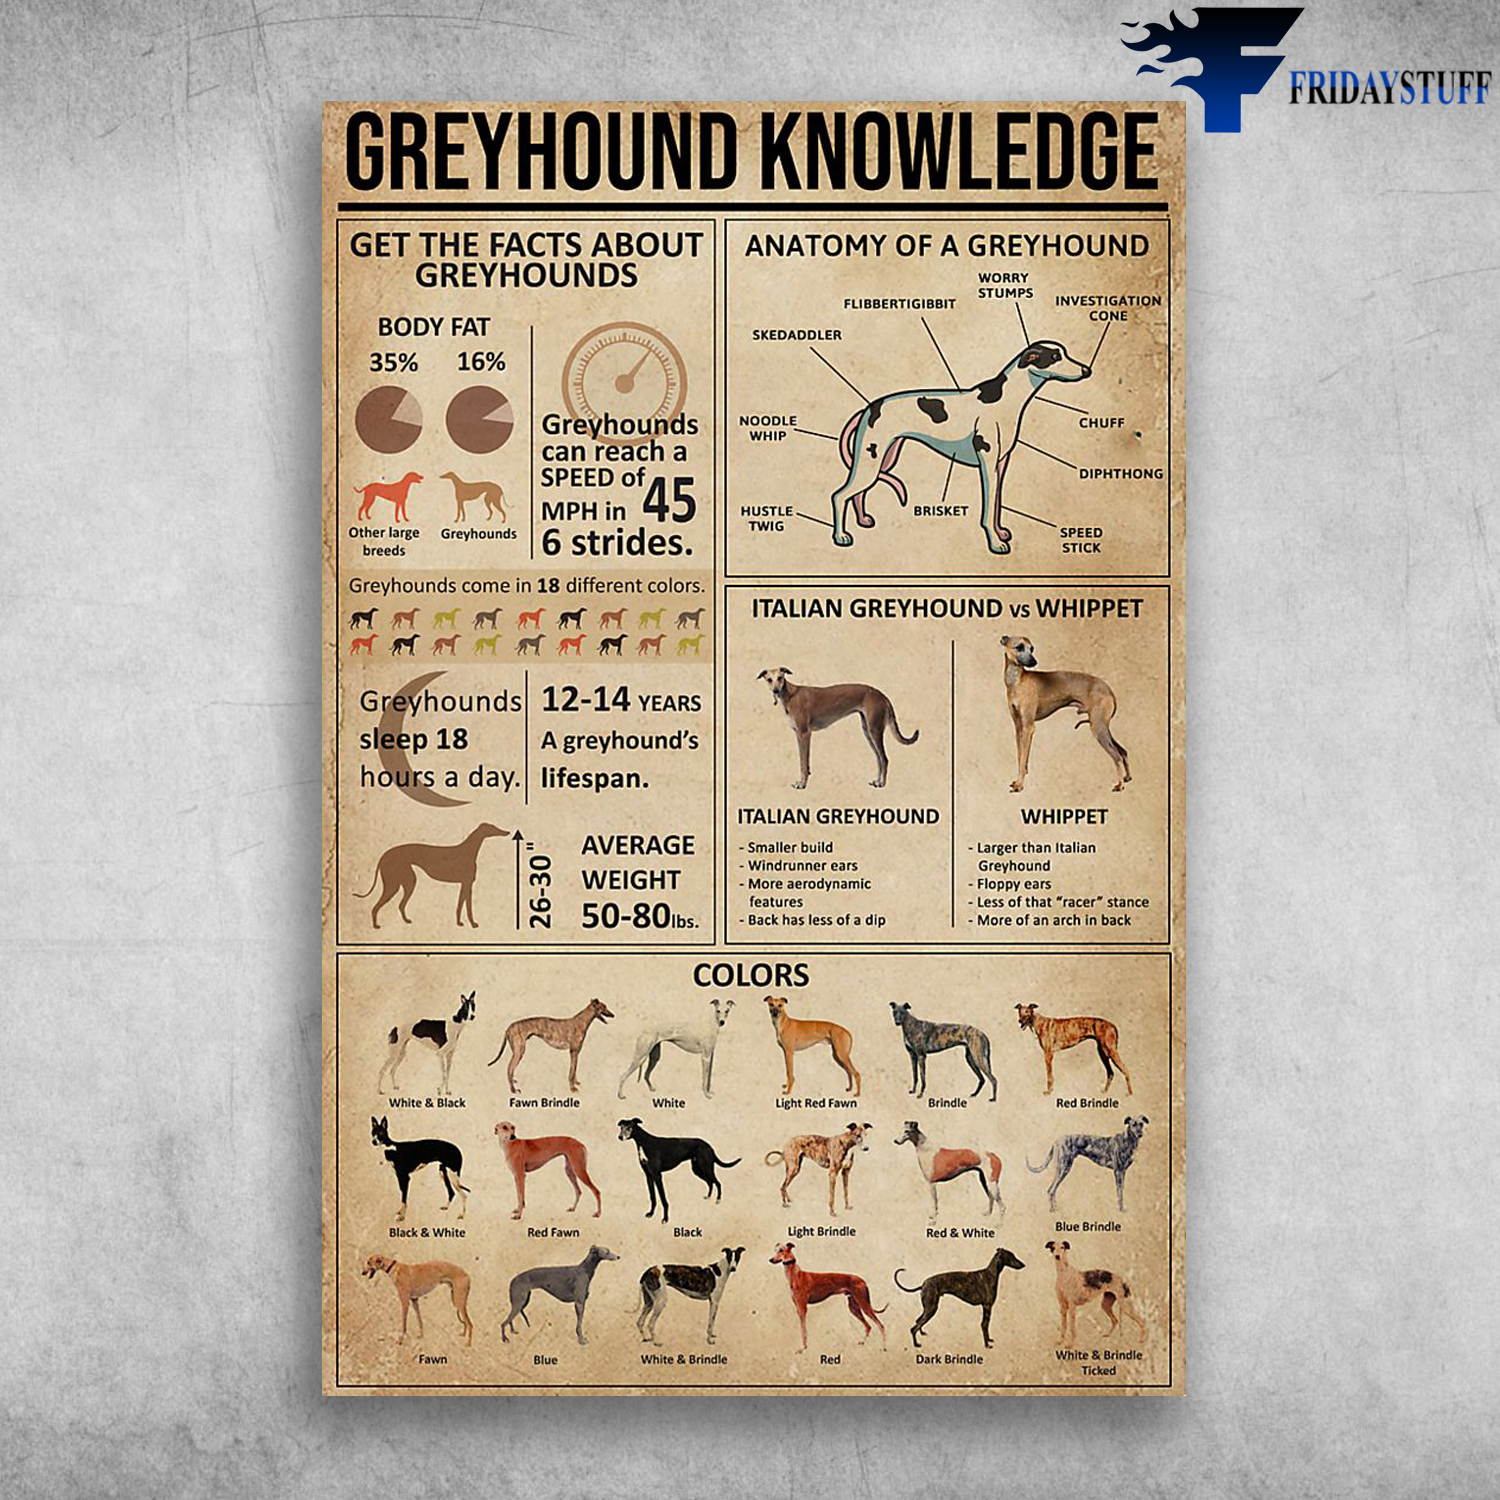 Greyhound Knowledge Get The Facts About Greyhounds